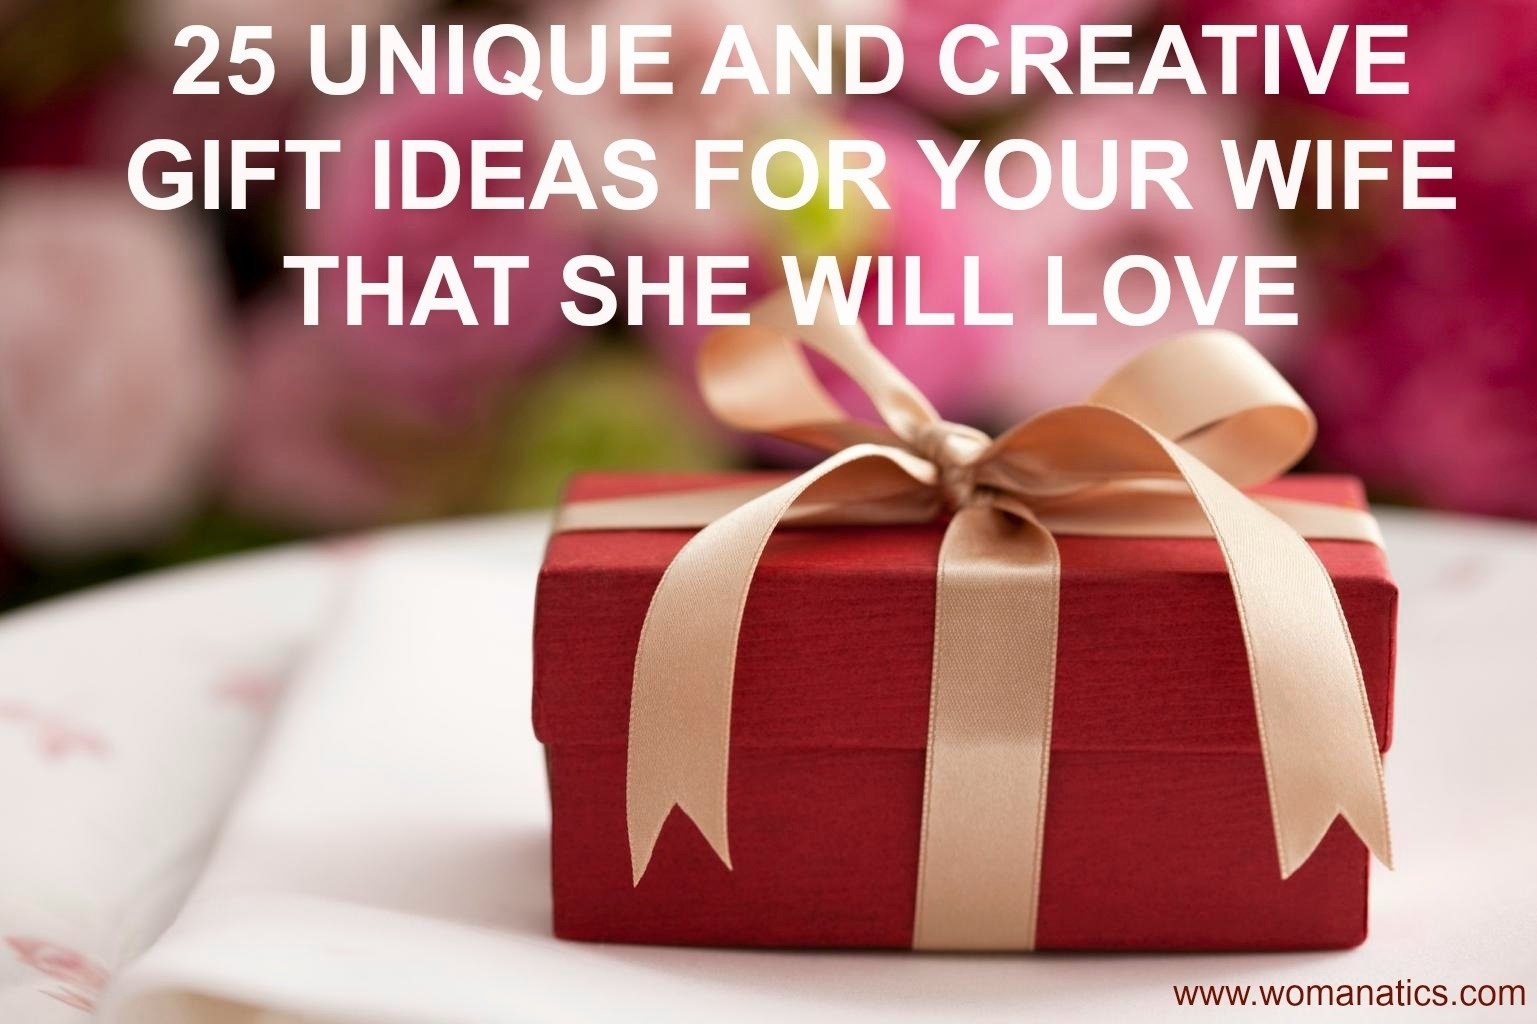 10 Lovely Good Gift Ideas For Wife 25 unique and creative gift ideas for your wife that she will love 3 2022